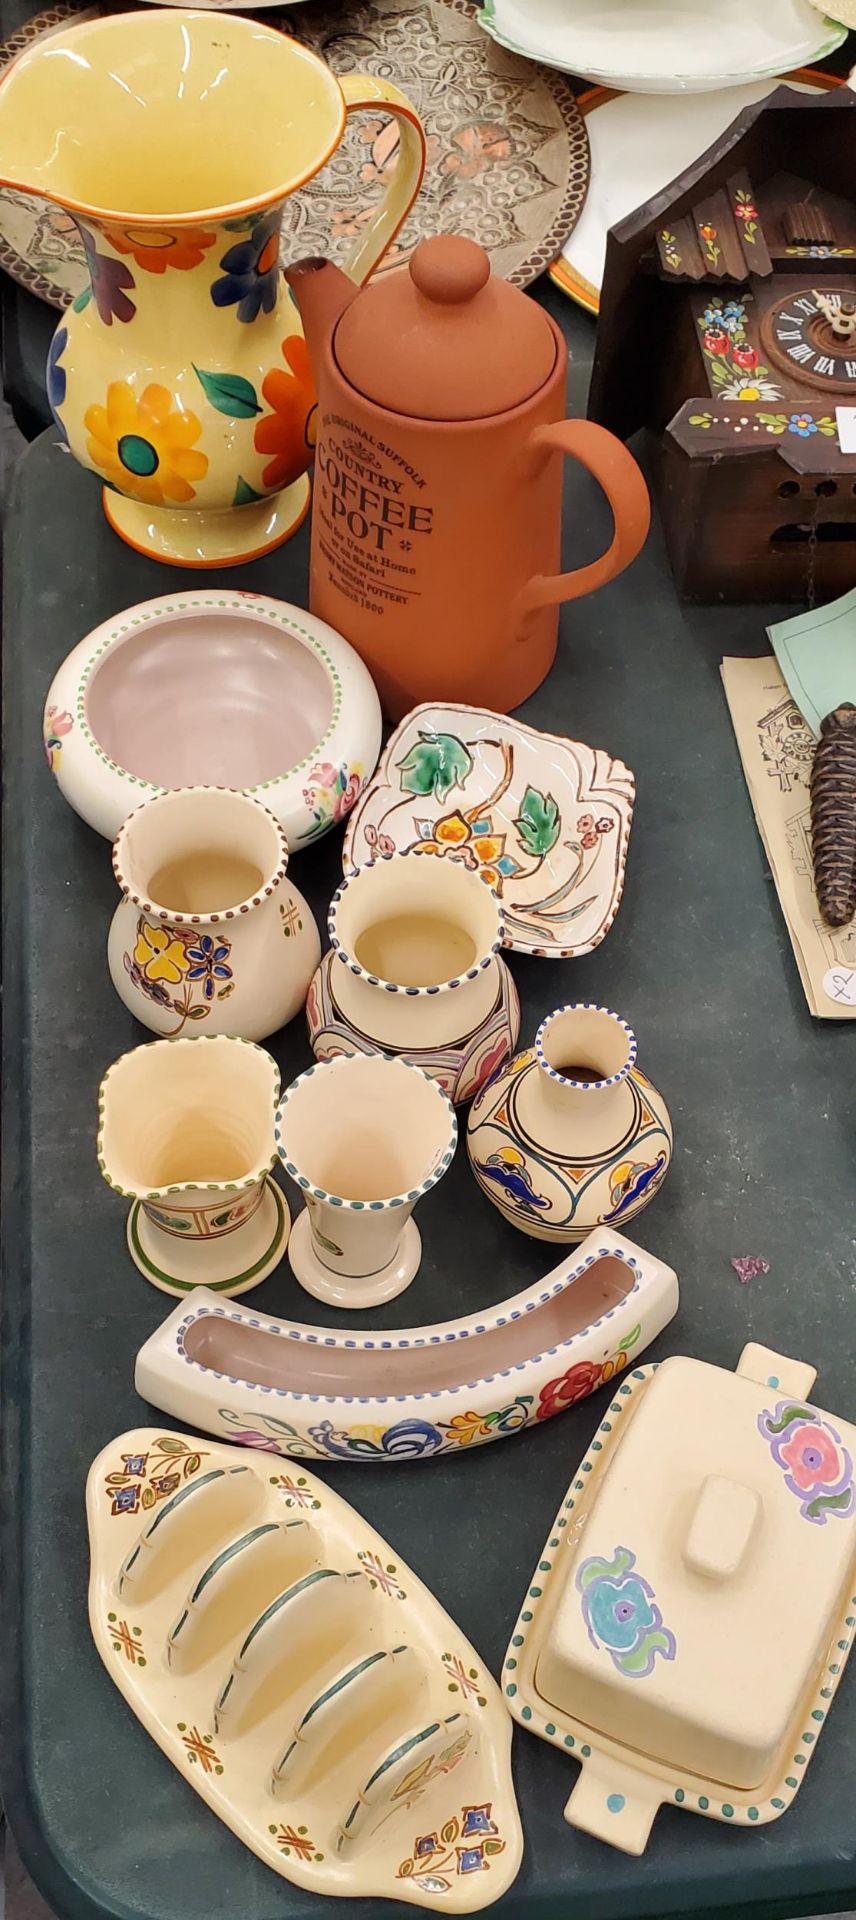 A COLLECTION OF HONITON DEVON POTTERY TO INCLUDE VASES, A TOAST RACK, BUTTER DISH, BOWLS, ETC,